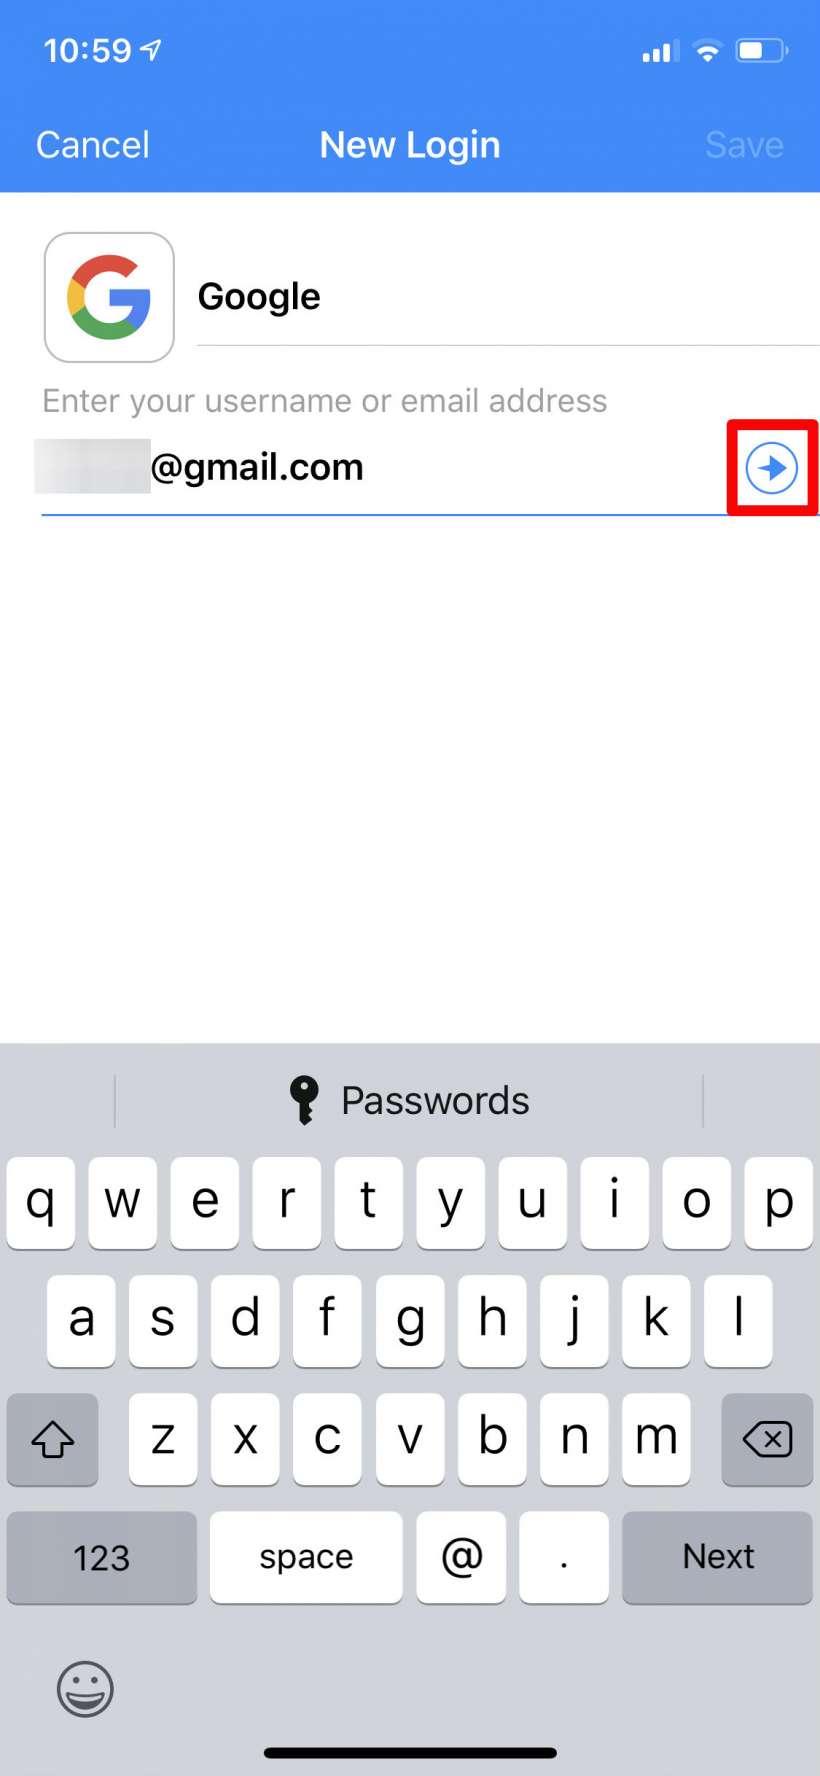 How to use 1Password password manager on iPhone, iPad and Mac.